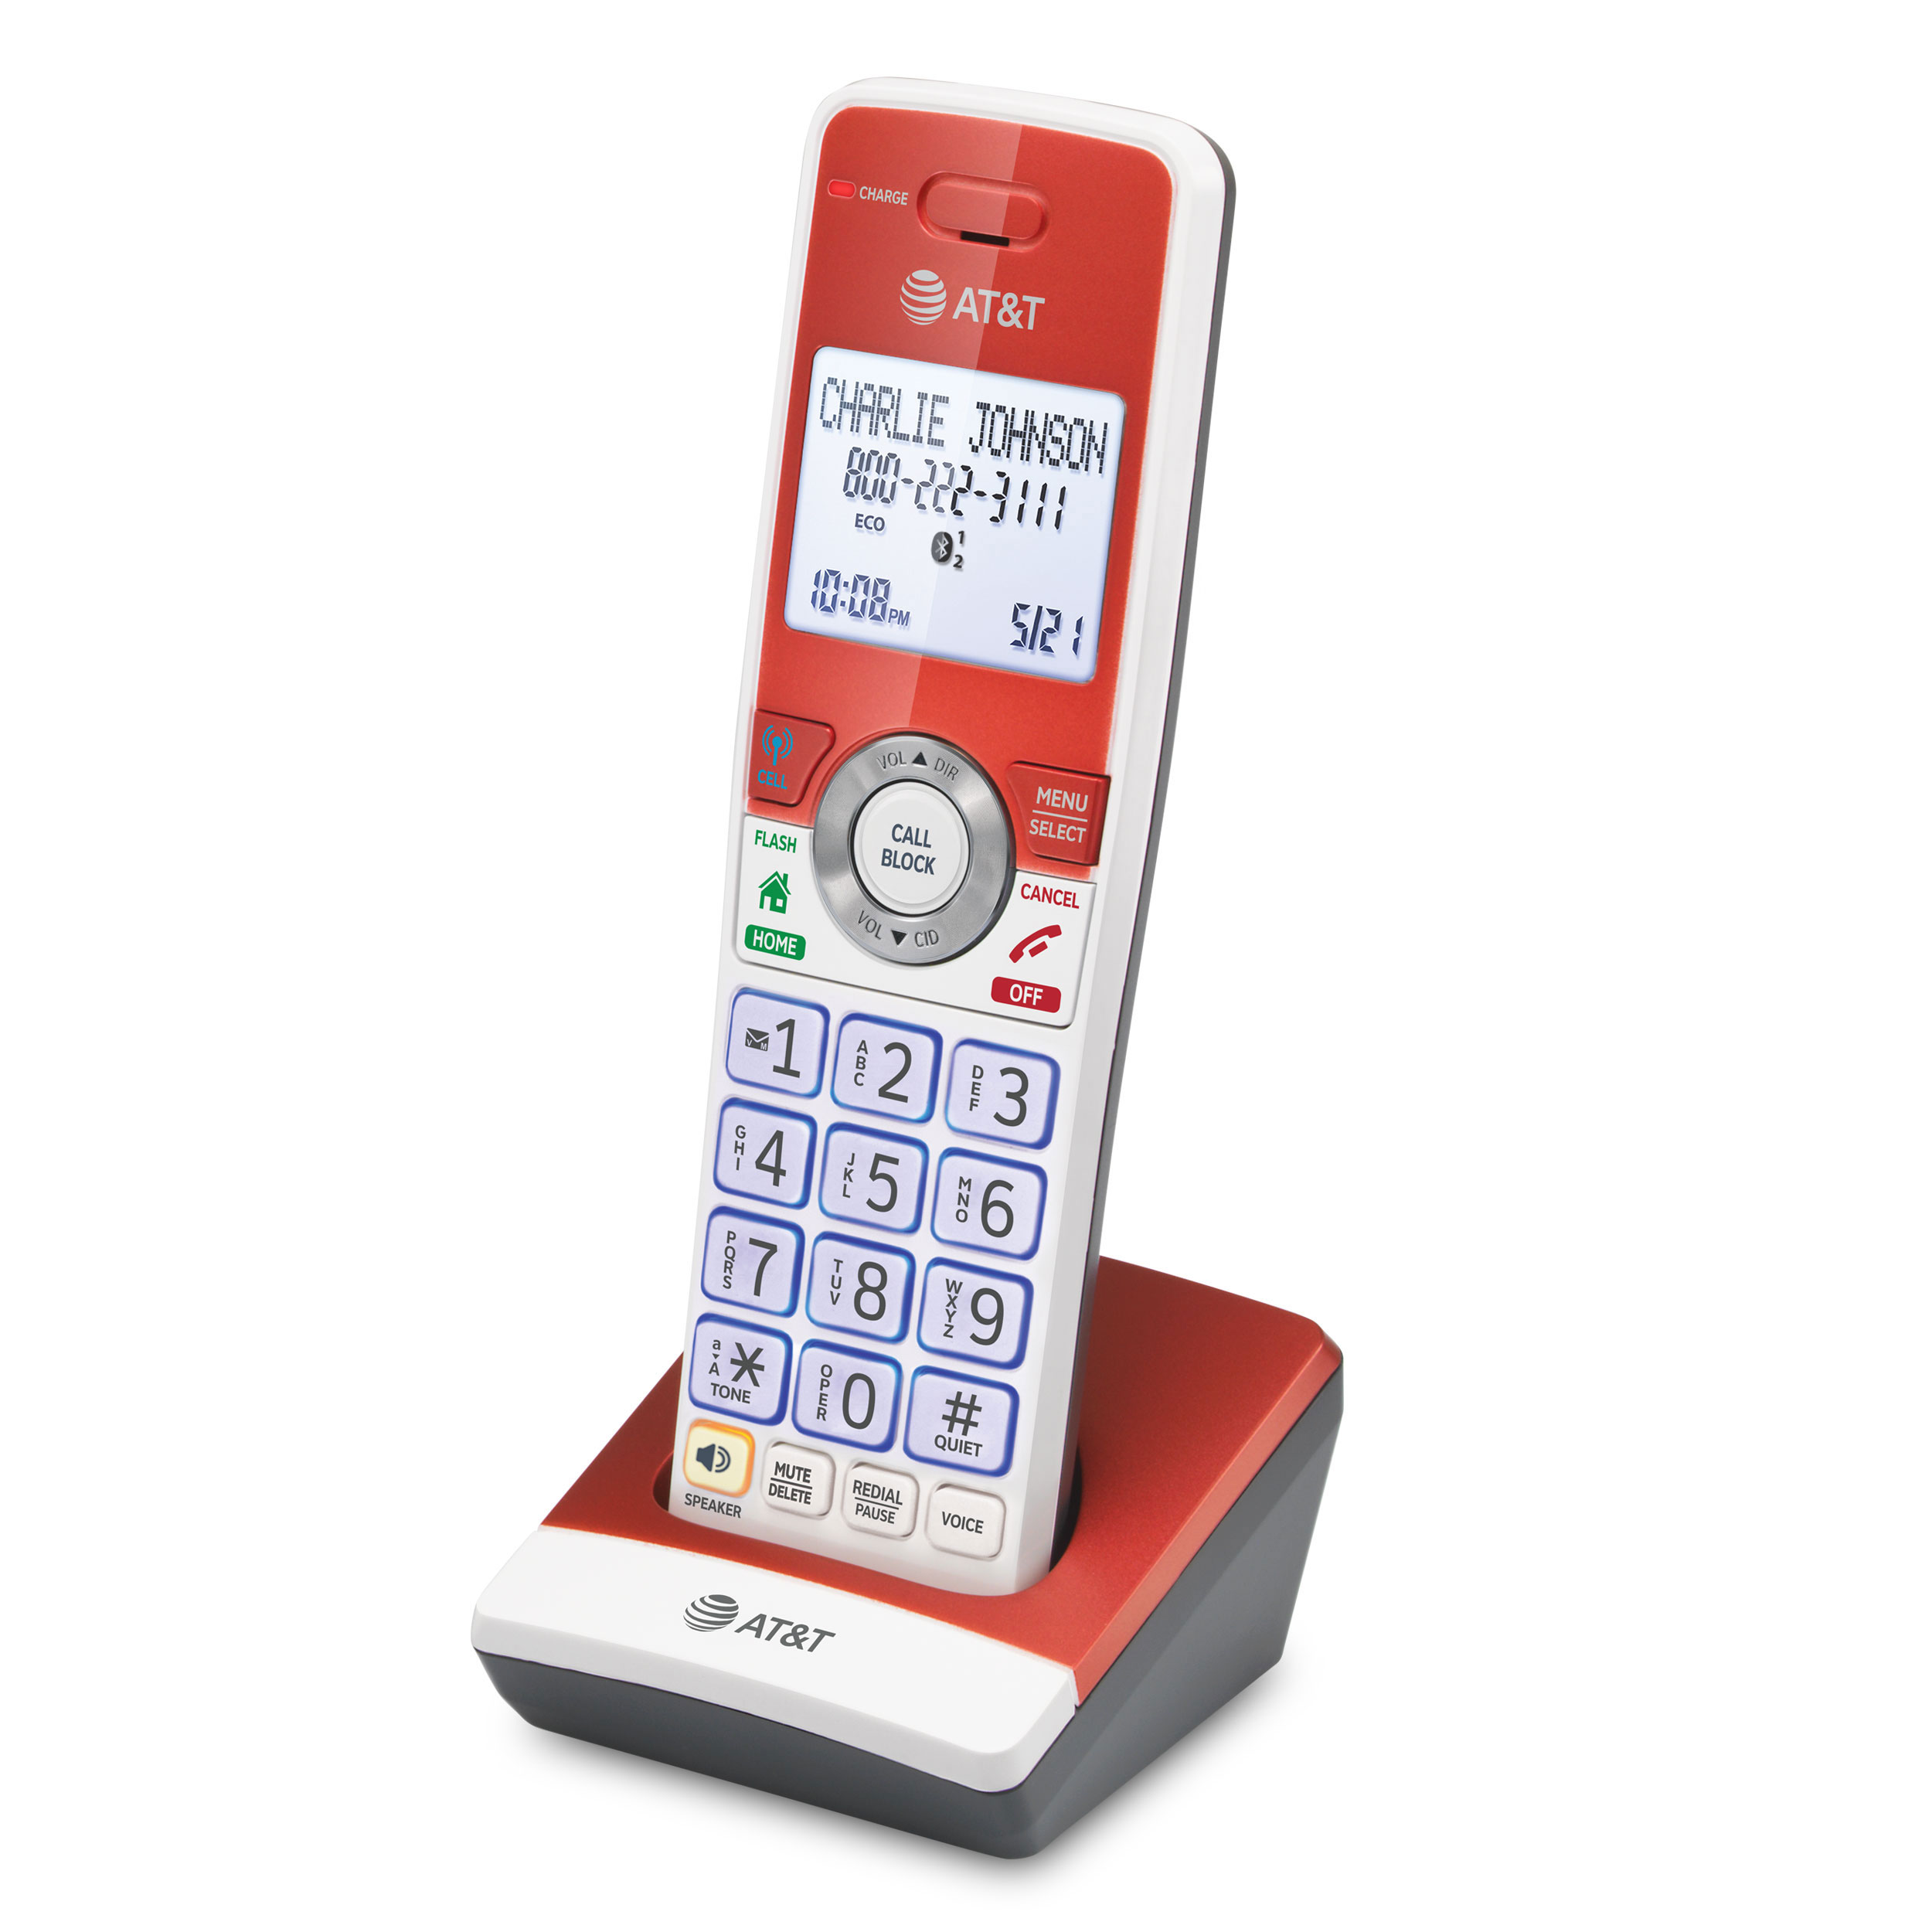 5-Handset Expandable Cordless Phone with Unsurpassed Range, Bluetooth Connect to Cell™, Smart Call Blocker and Answering System - view 5